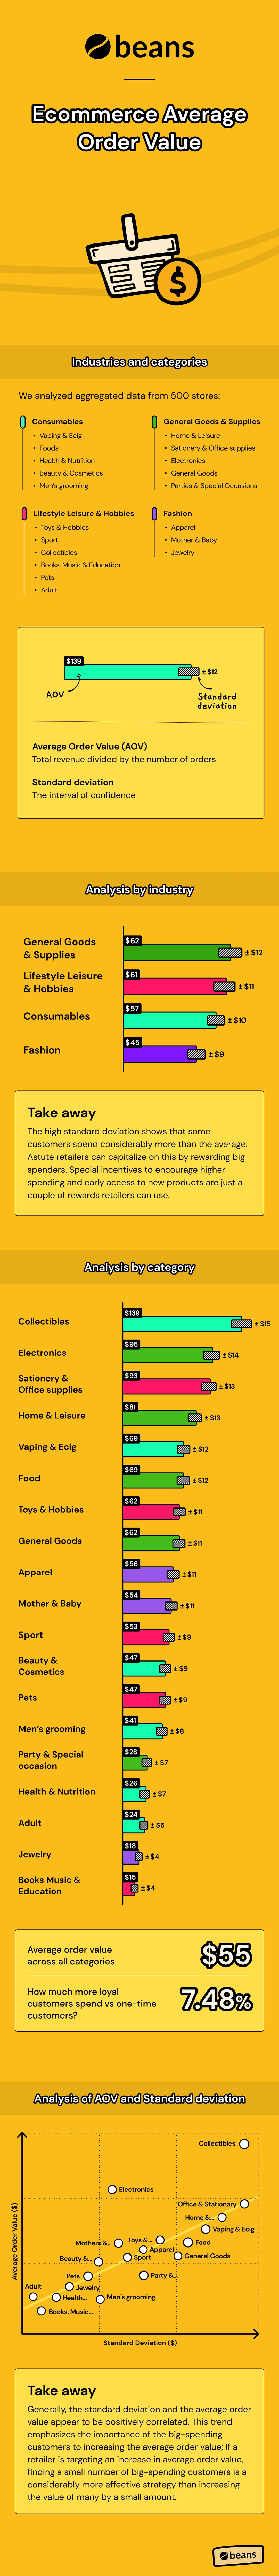 Average Order Value of E-Commerce Stores Infographic